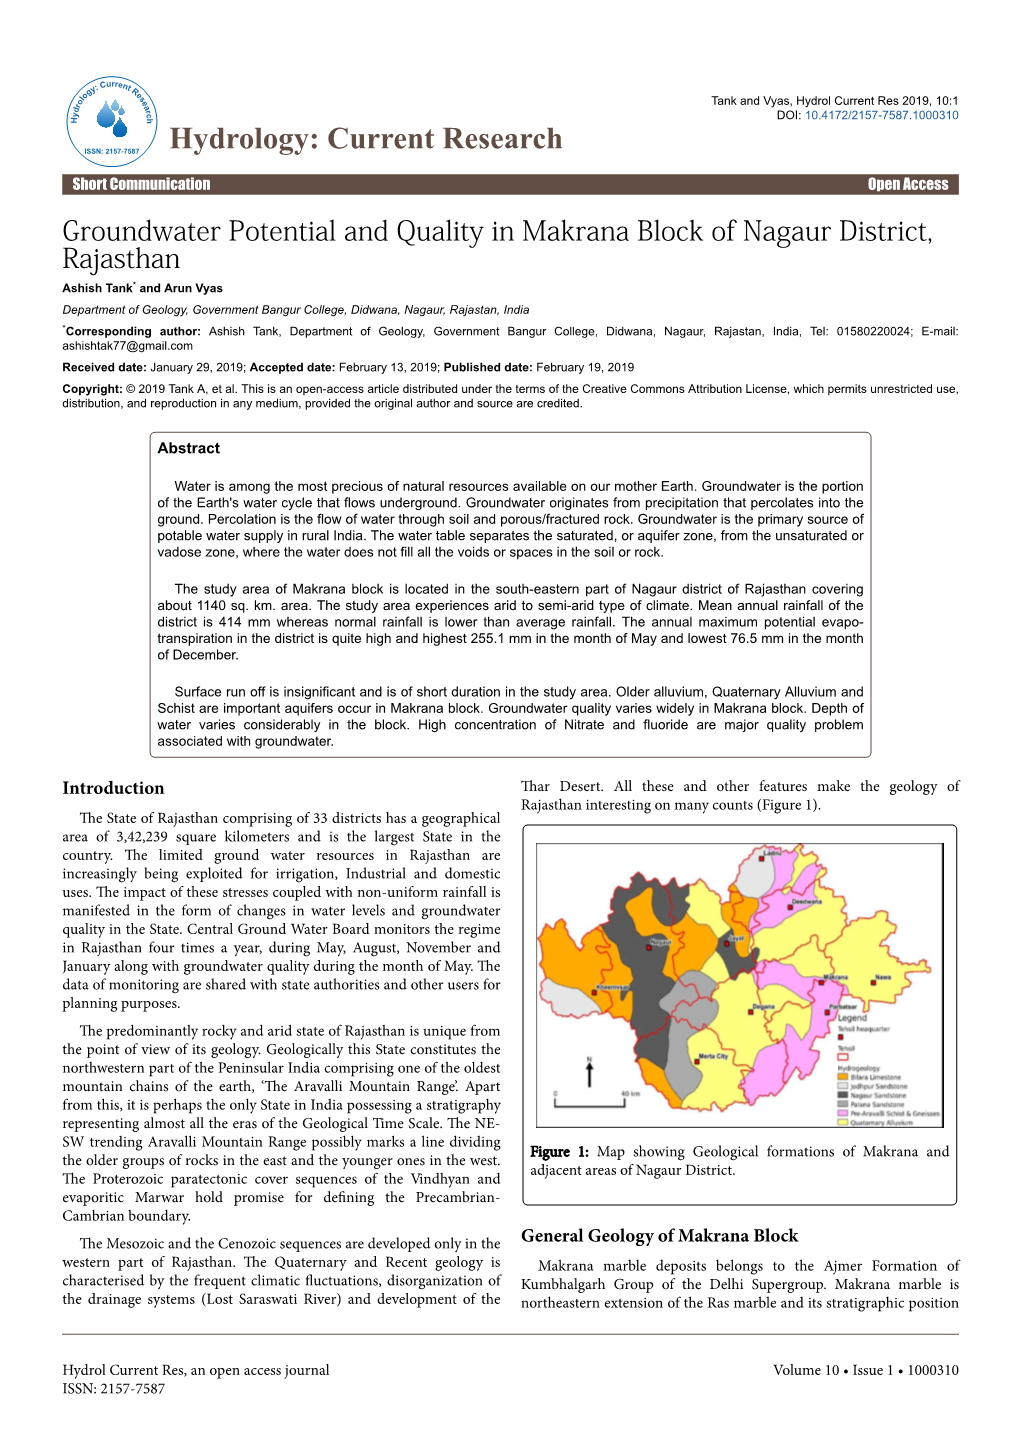 Groundwater Potential and Quality in Makrana Block of Nagaur District